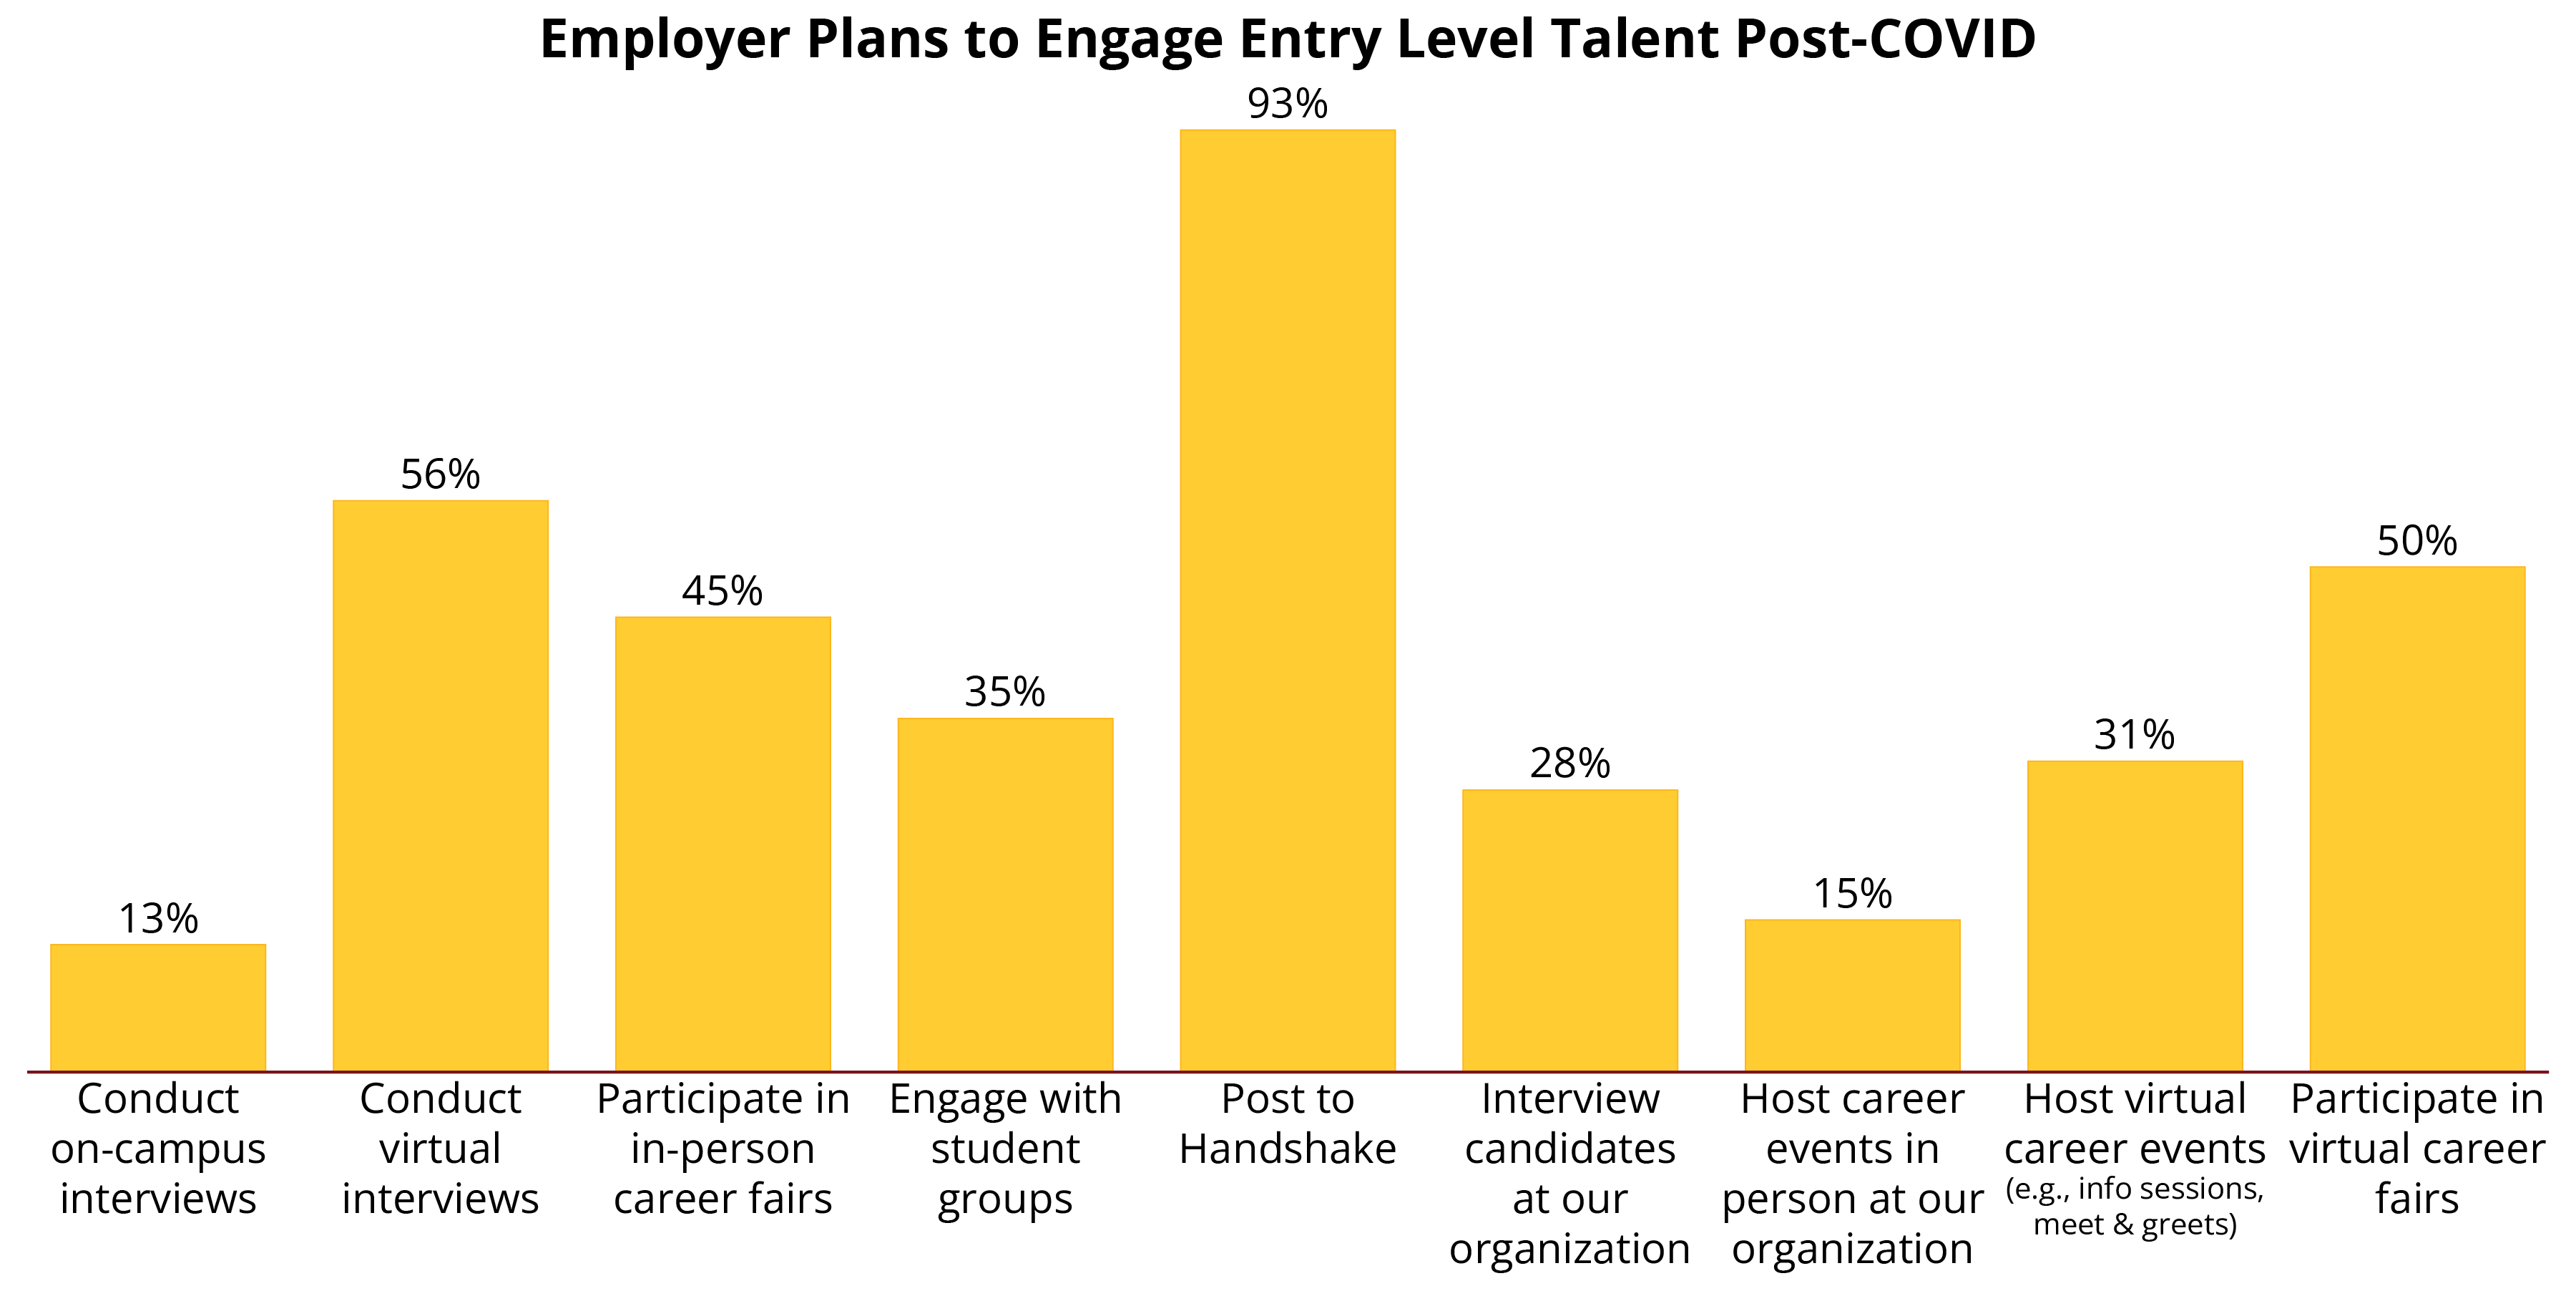 Bar chart of employer plans to engage entry level talent post-COVID. 13% conduct on-campus interviews. 56% conduct virtual interviews. 45% participate in in-person career fairs. 35% engage with students groups. 93% post to Handshake. 28% interview candidates at our organization. 15% host career events in person at our organization. 31% host virtual career events. 50% participate in virtual career fairs.